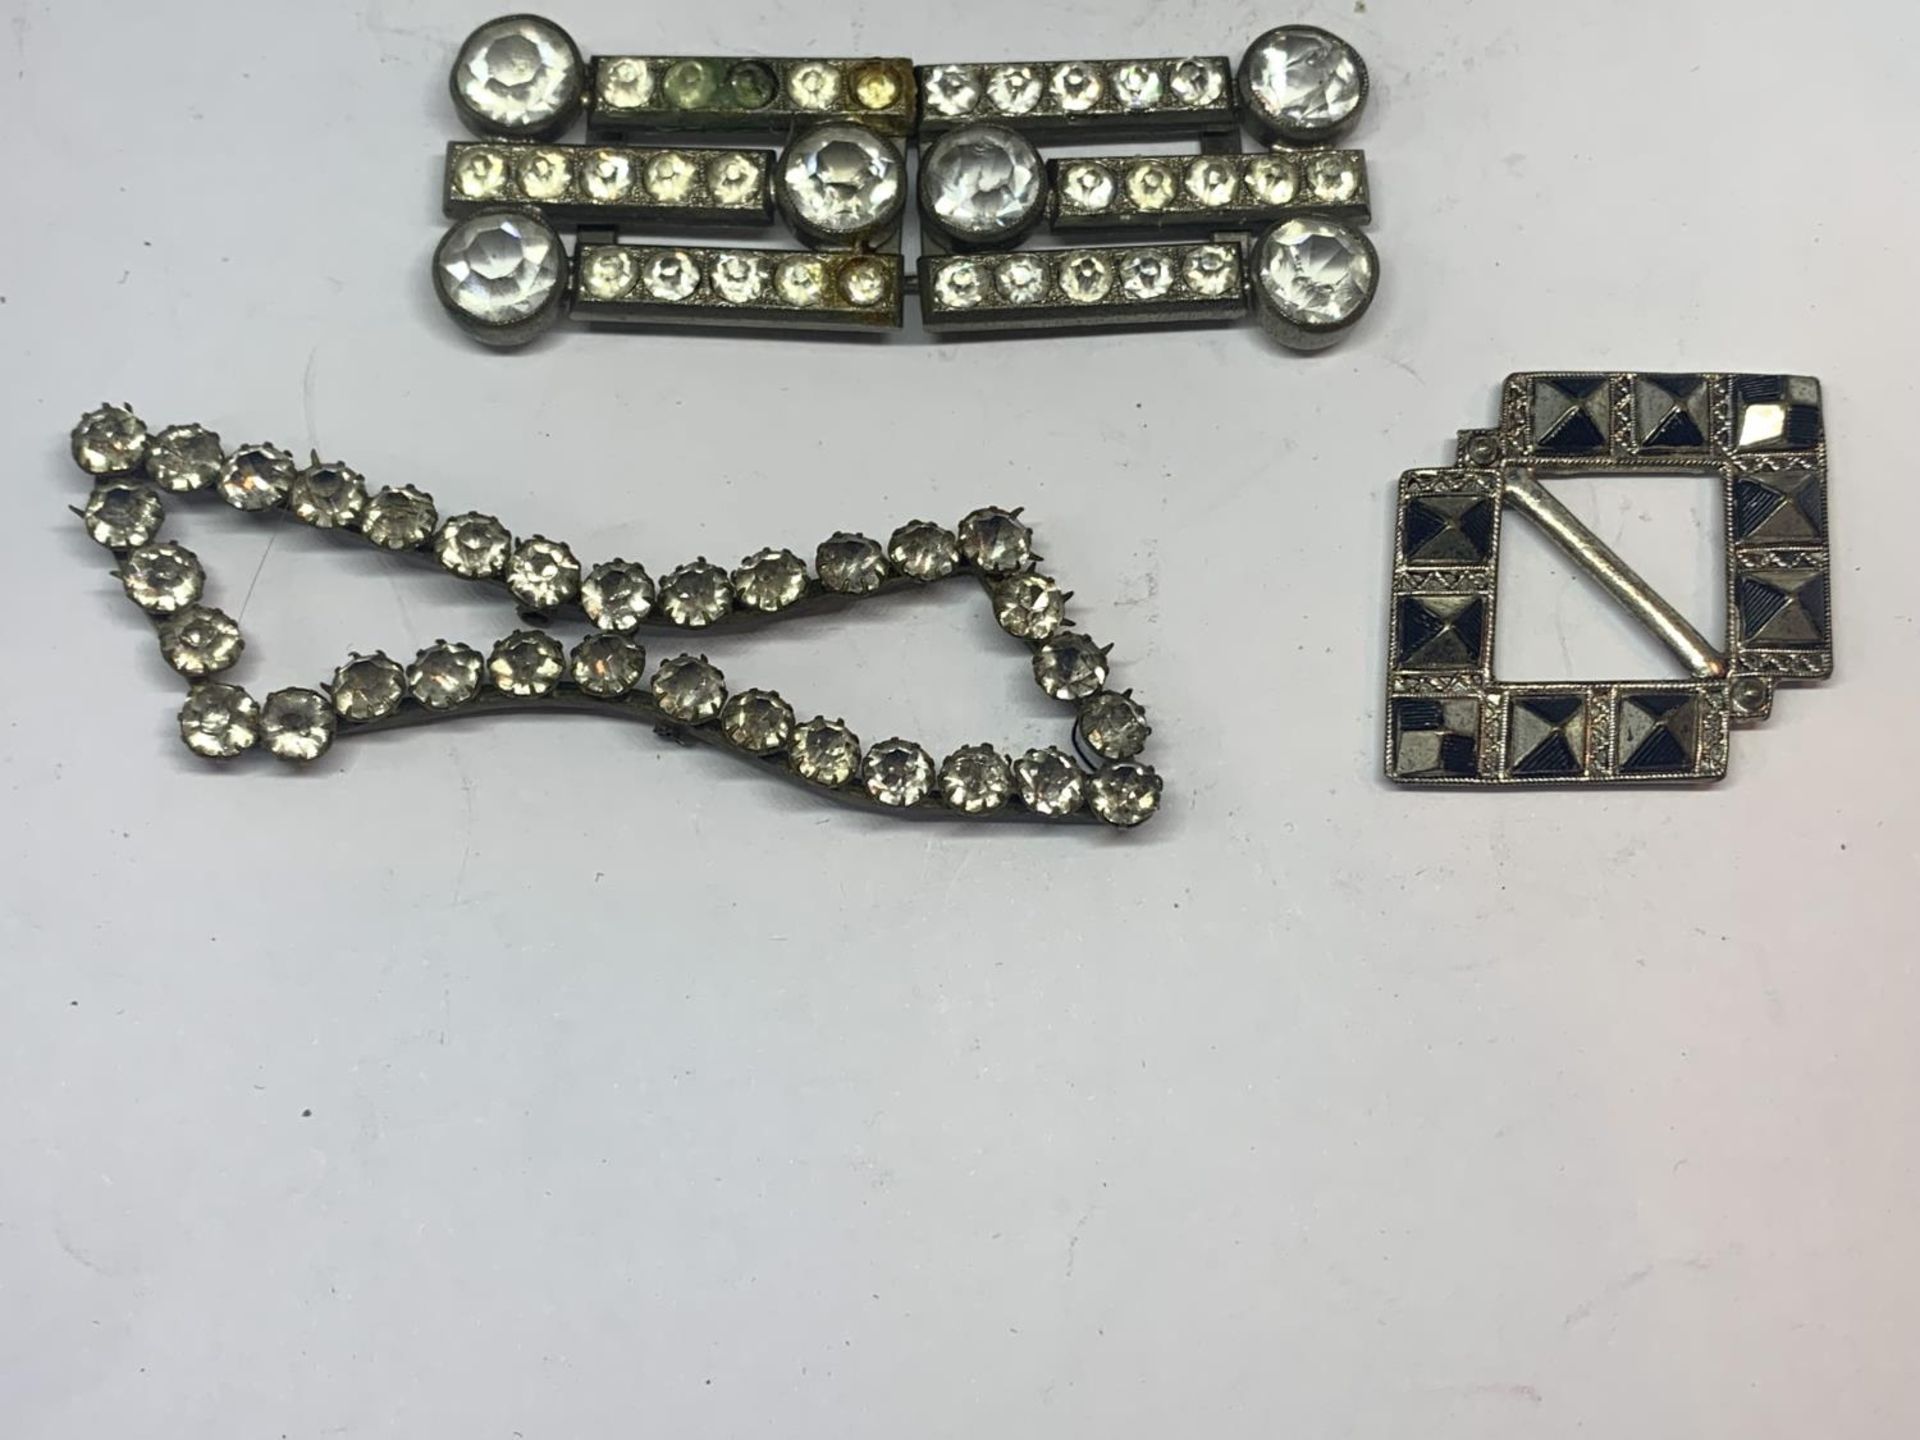 SIX VARIOUS DECORATIVE BUCKLES SOME WITH CLEAR STONES, ONE WITH AGATE ETC - Image 3 of 6